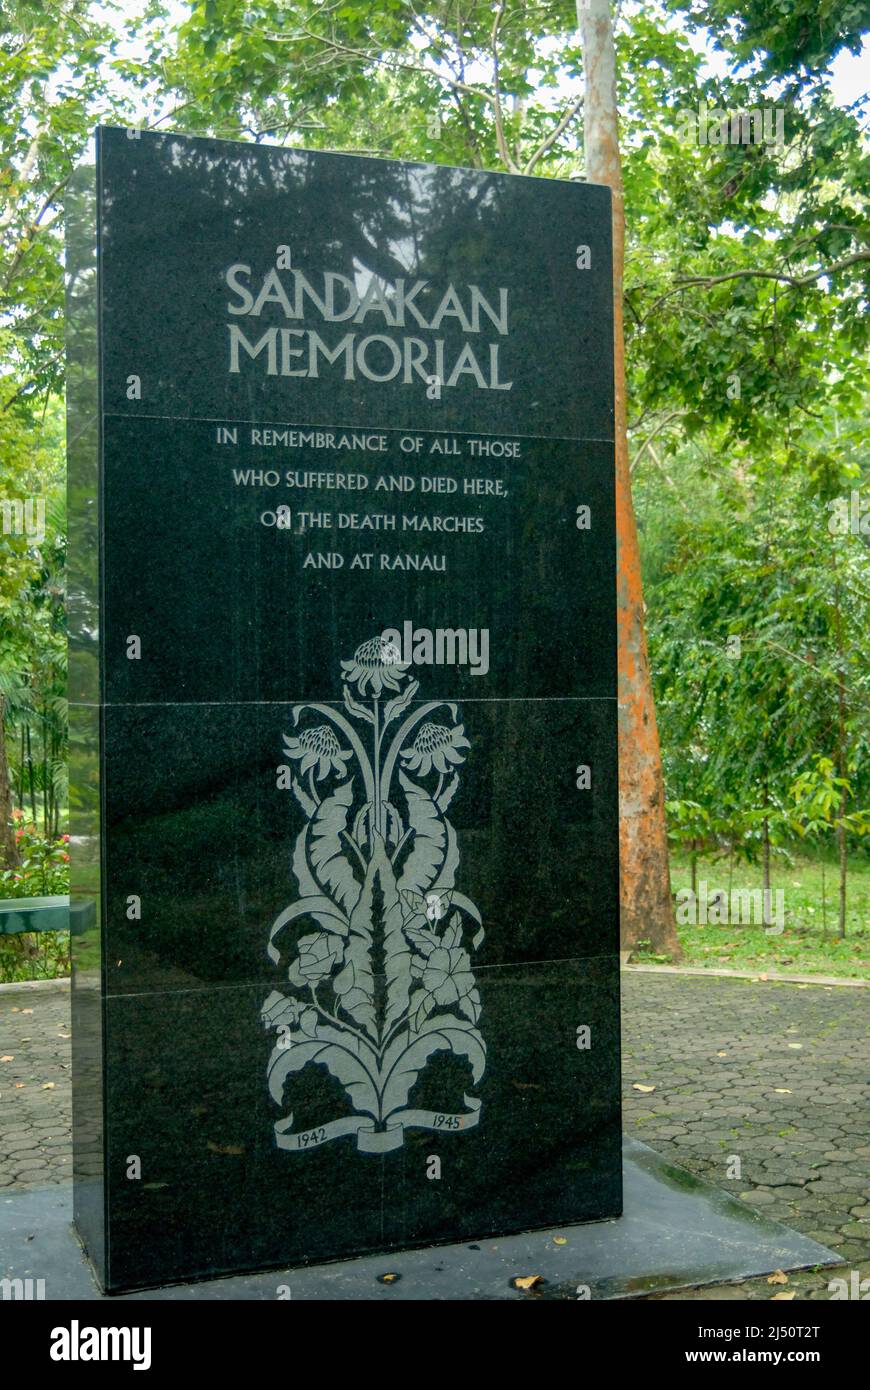 Memorial for those who died on the Sandakan Death Marches during World War 2. Stock Photo